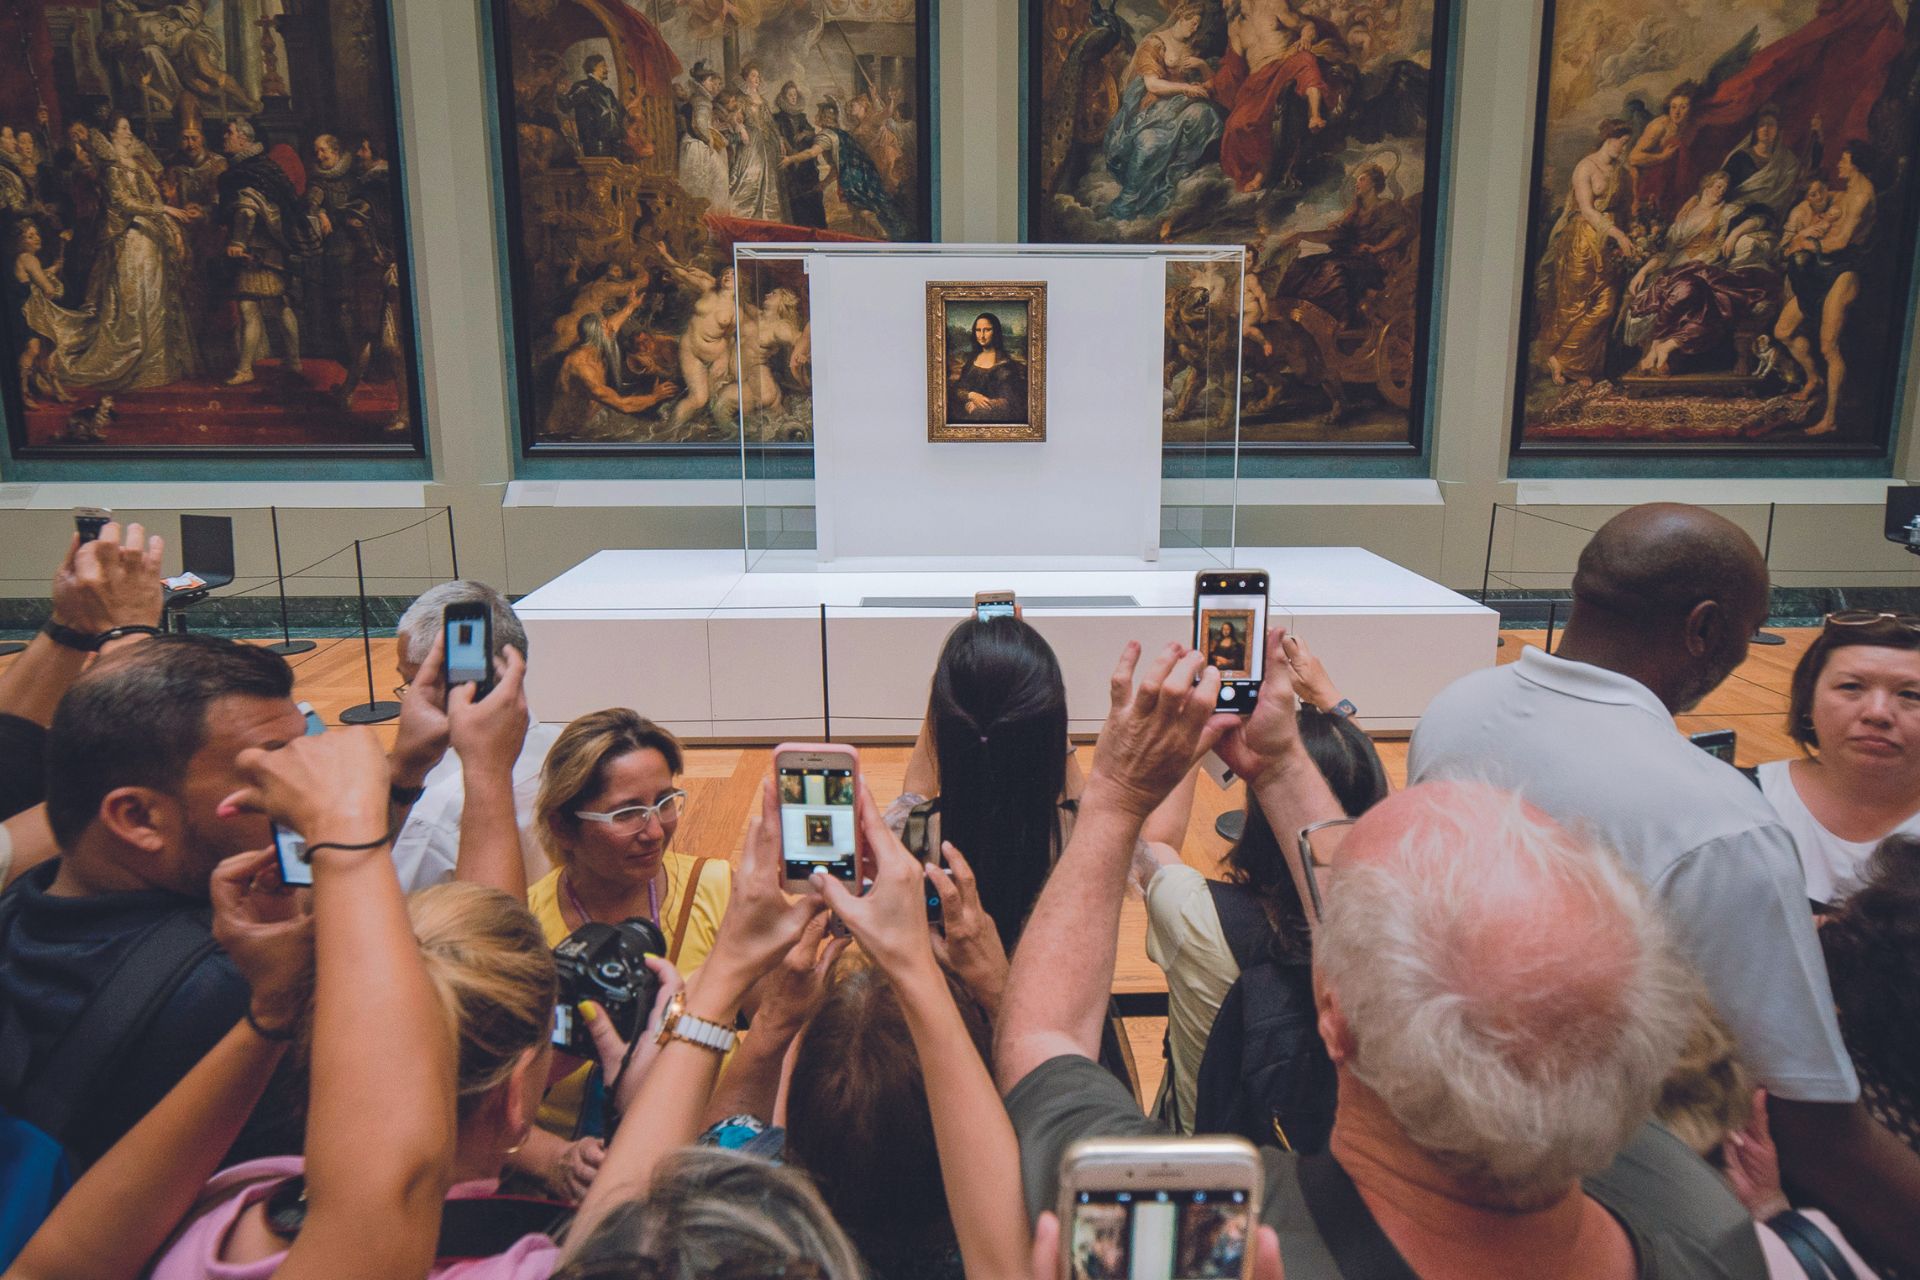 Crowds of tourists taking pictures of the Mona Lisa